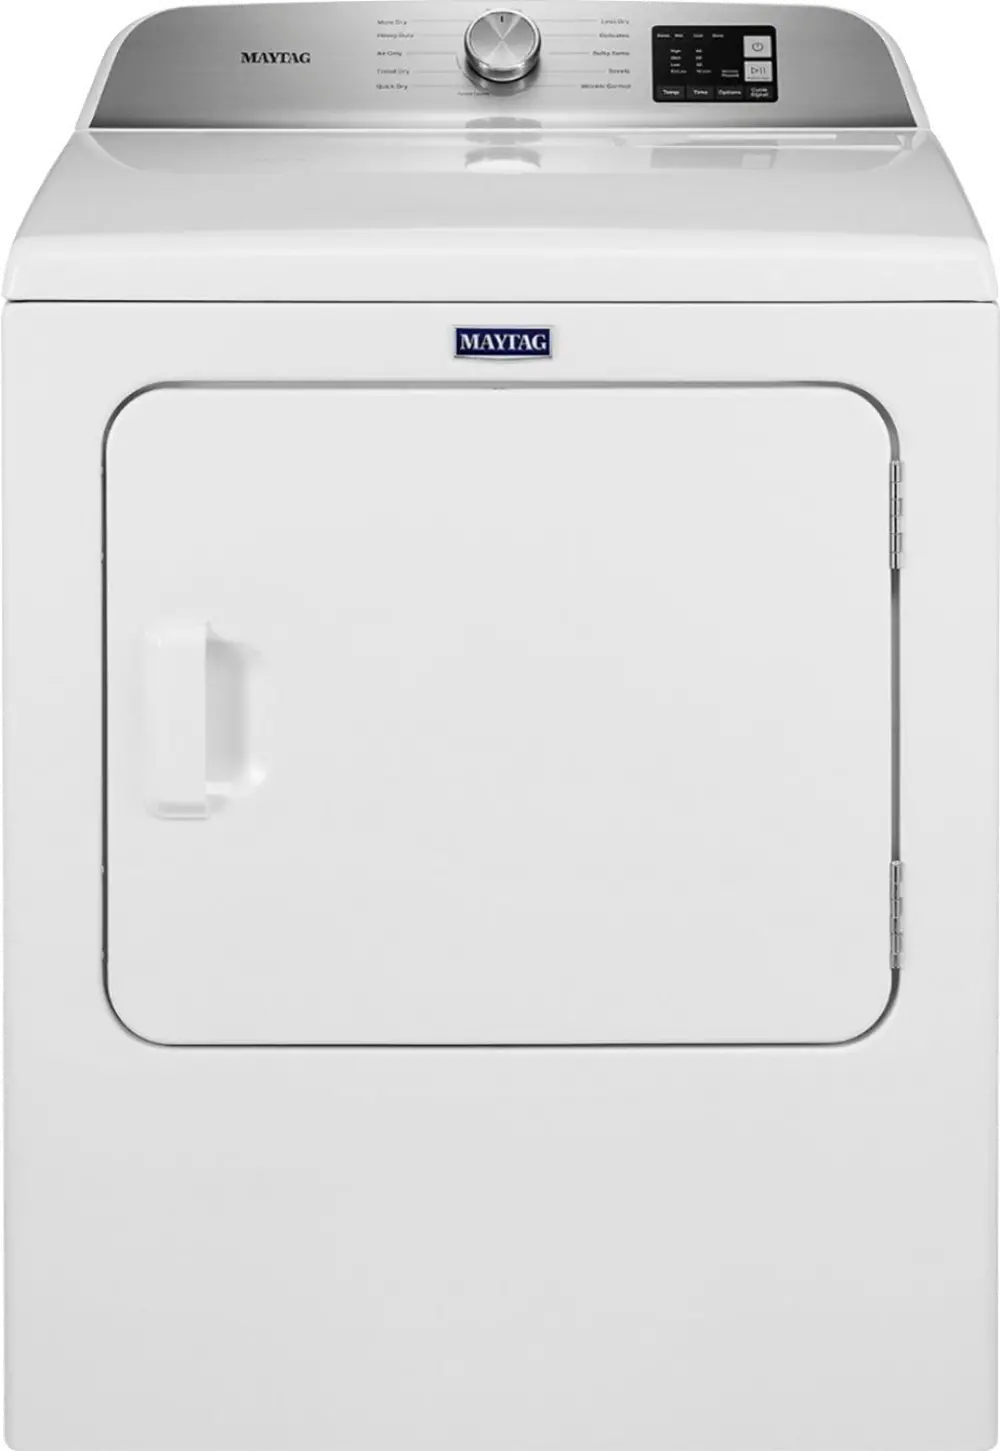 MED6200KW Maytag 7.0 Cu Ft Electric Dryer with IntelliDry - White-1